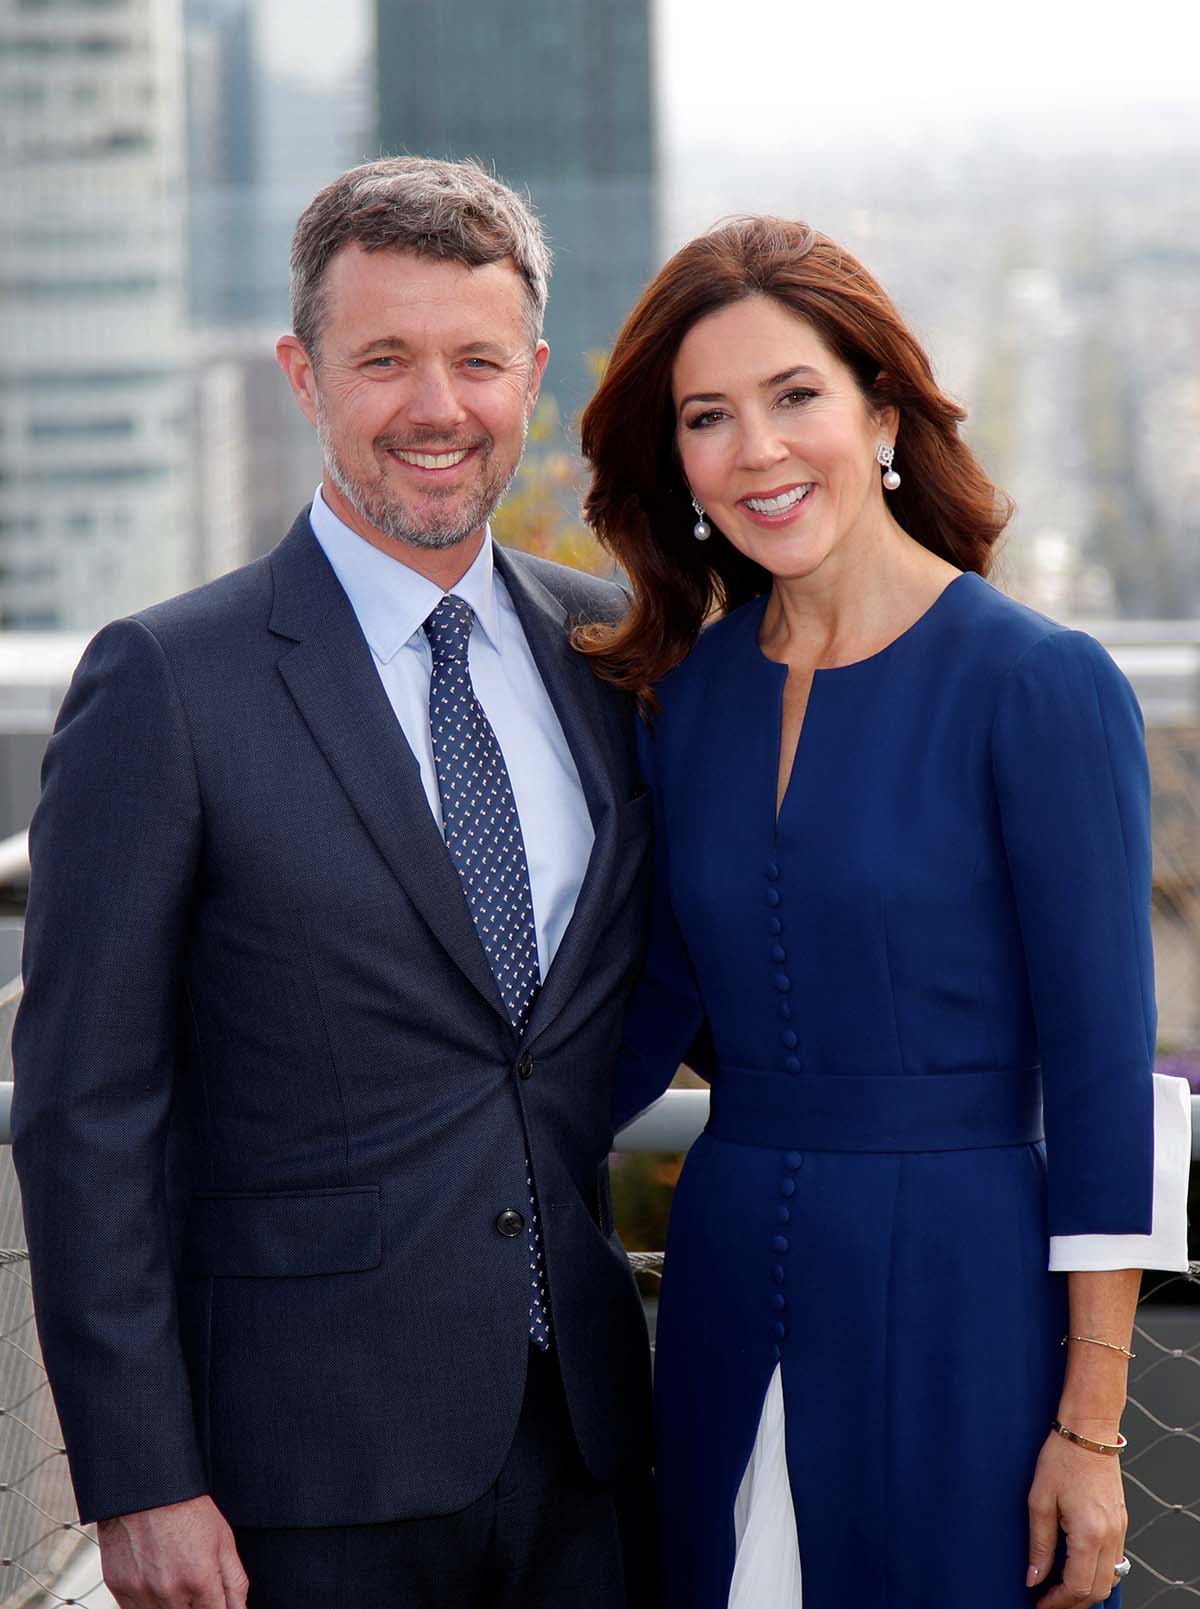 Danish Crown Prince Frederik and Princess Mary in Puteaux, near Paris during a oficial visit to France October 7, 2019.  *** Local Caption *** .